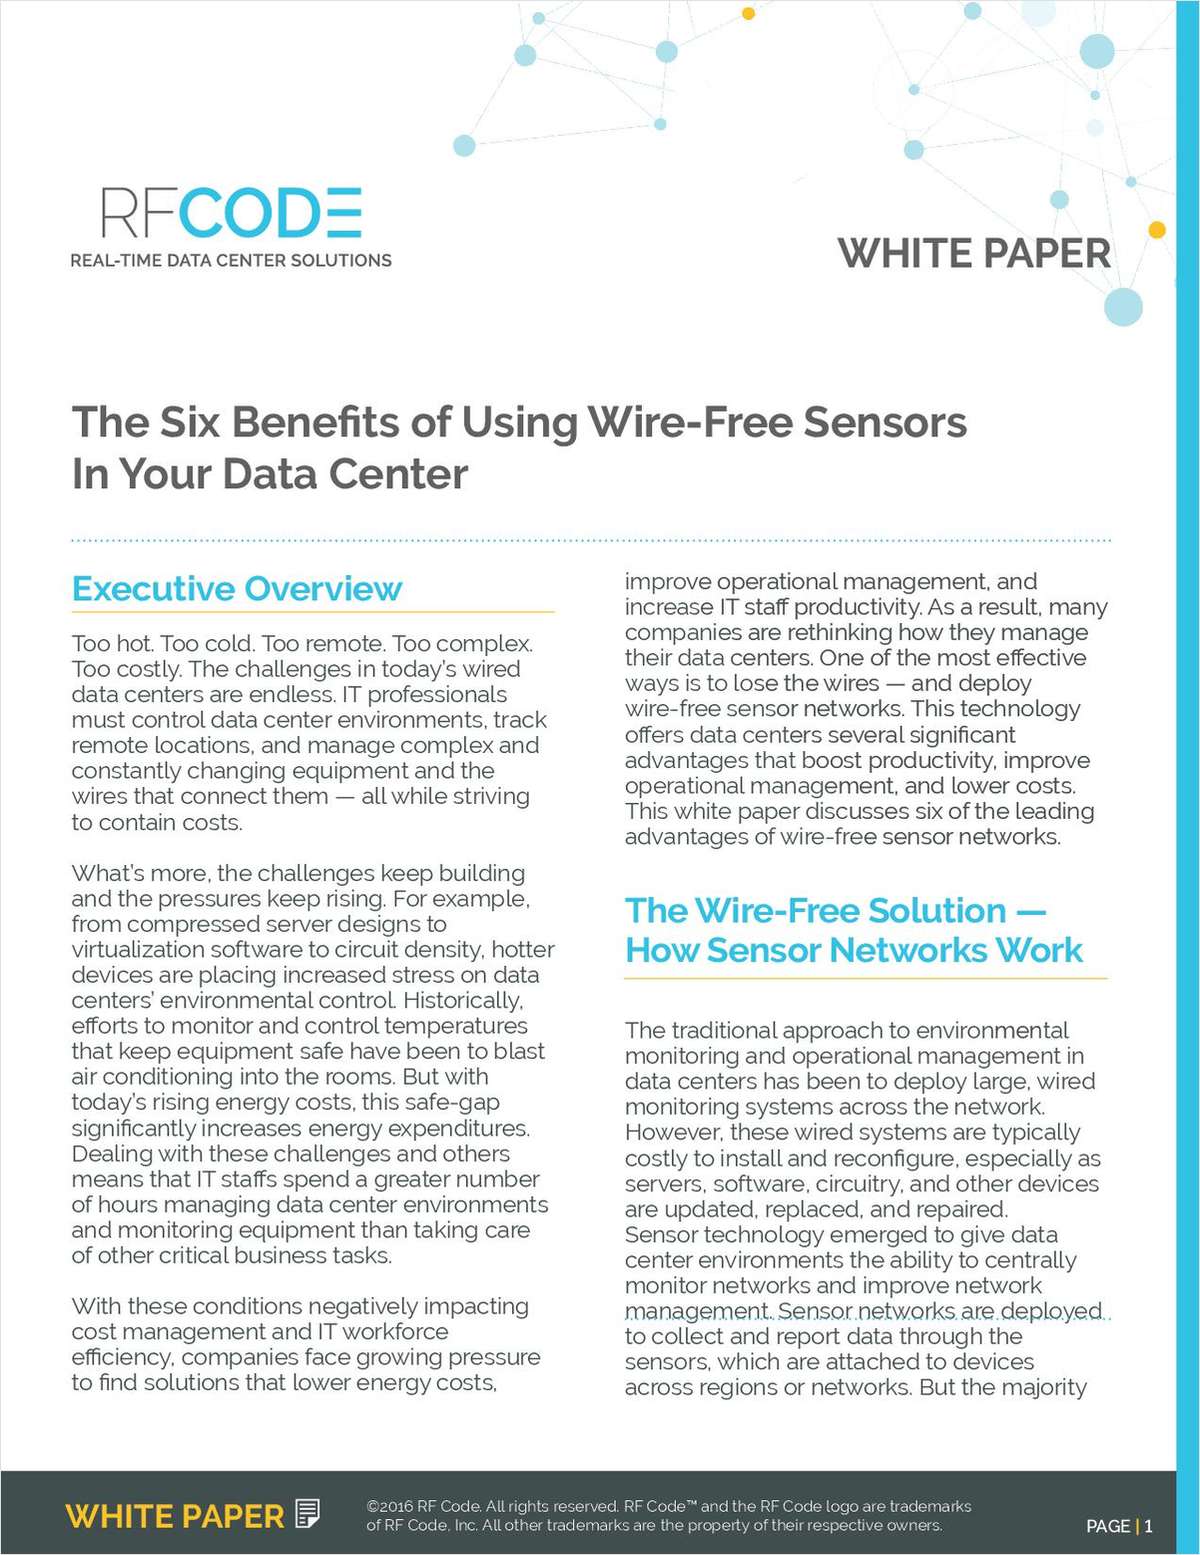 The Six Benefits of Using Wire-Free Sensors in Your Data Center